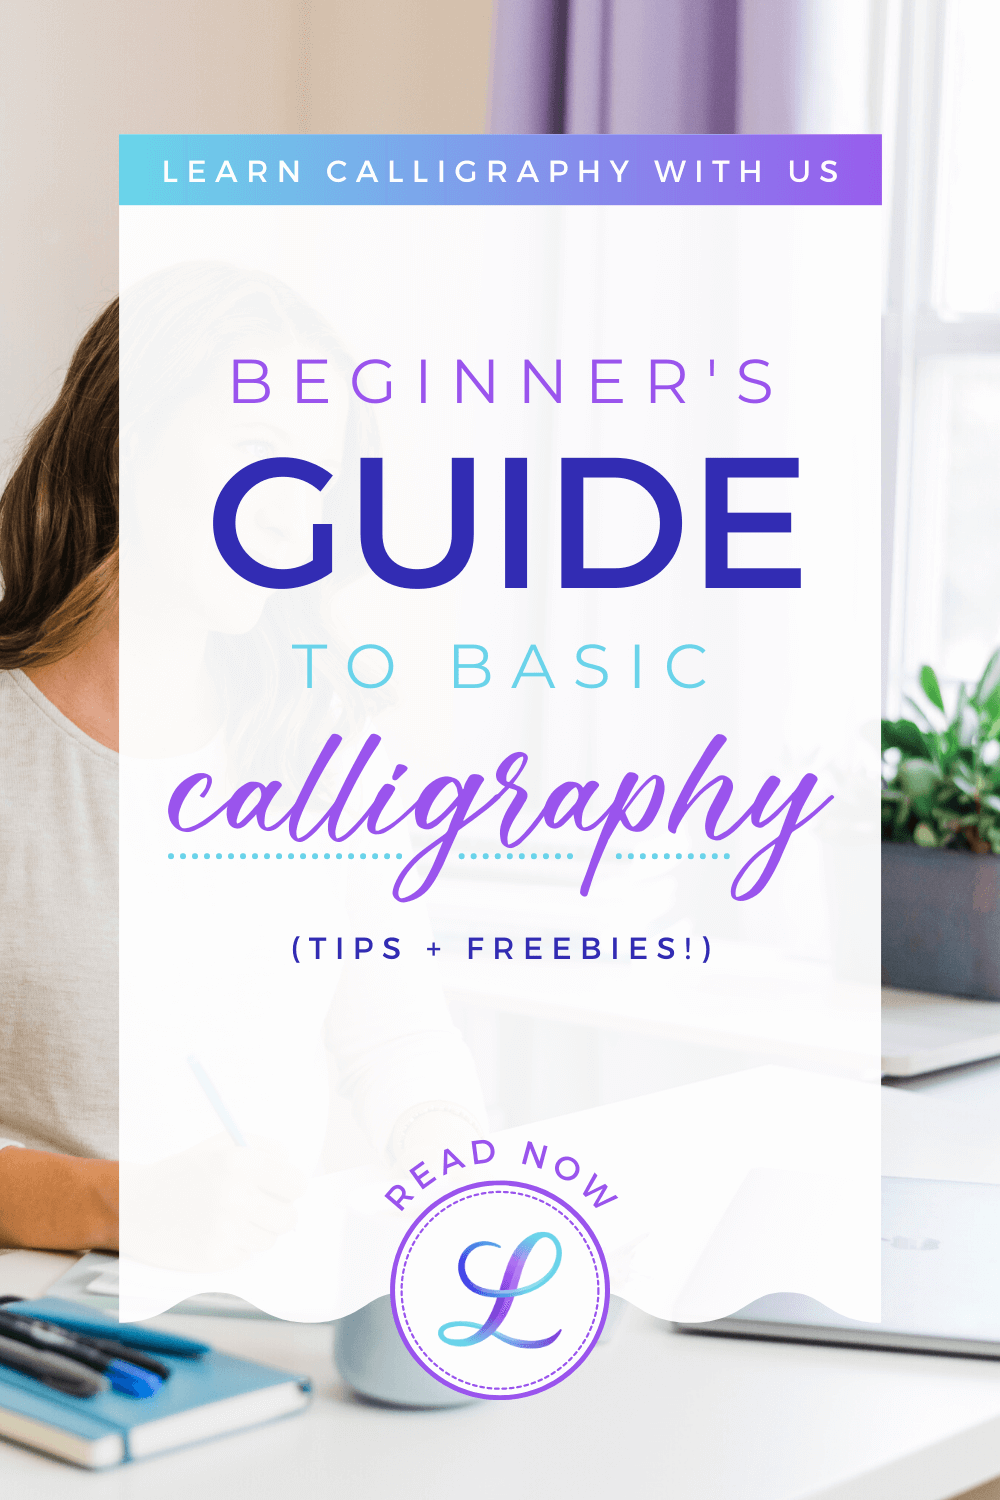 Beginner's Guide To Basic Calligraphy [Guide + Freebies